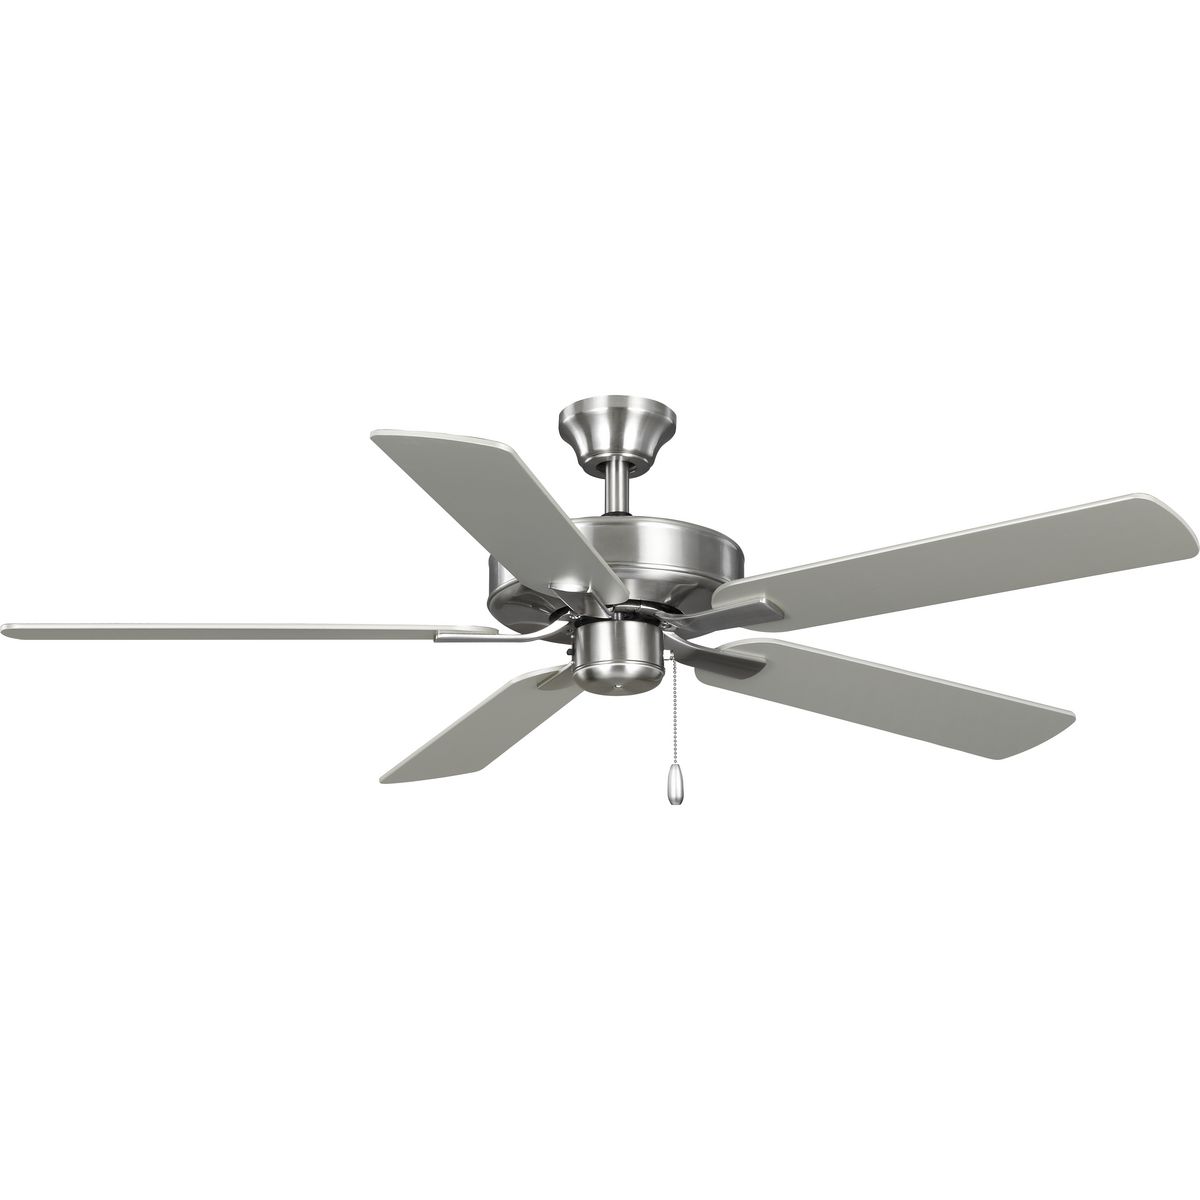 AirPro 52 in. Brushed Nickel 5-Blade AC Motor Transitional Ceiling Fan, P250080-009